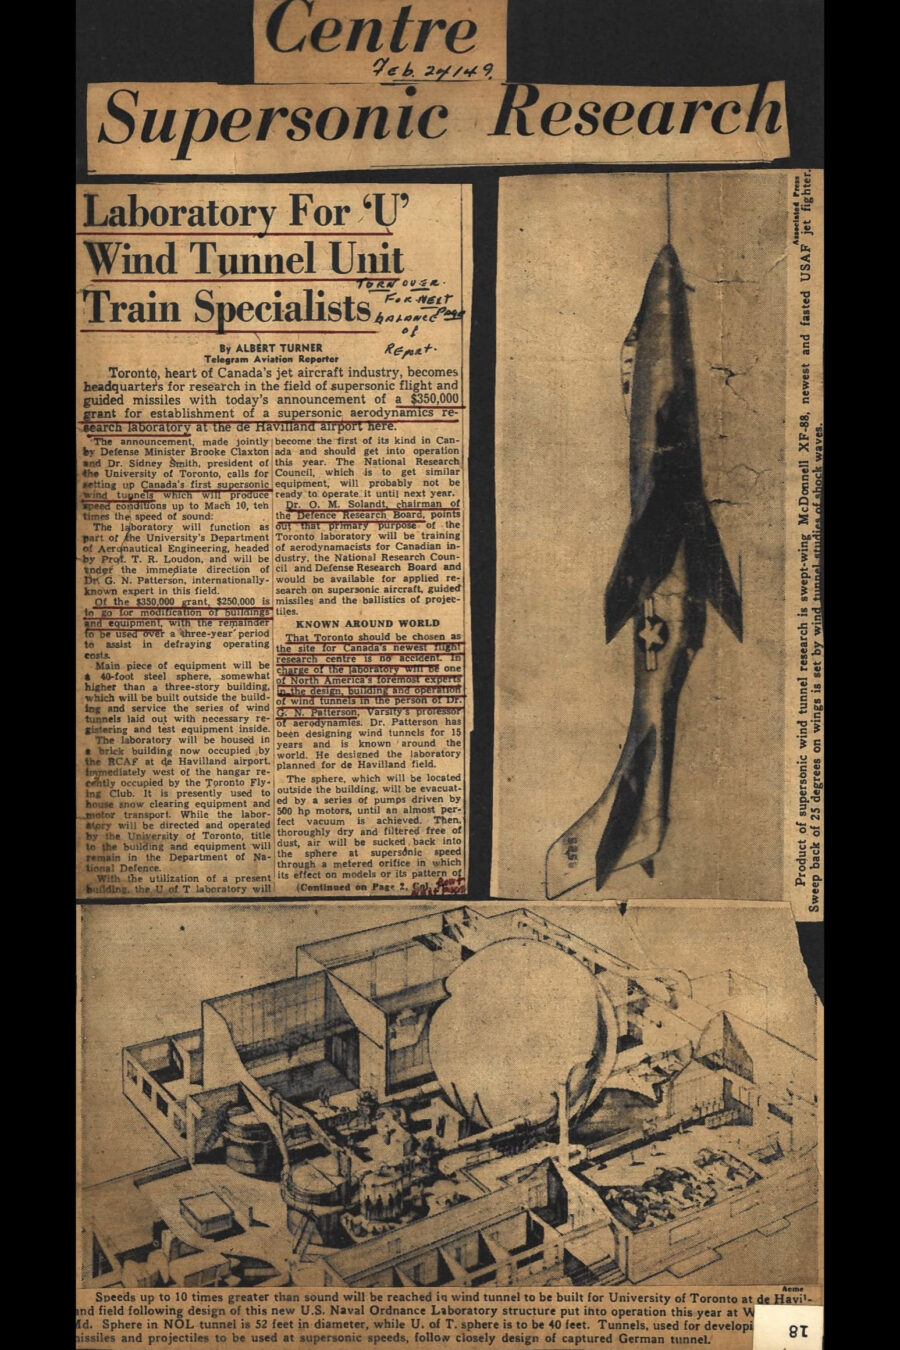 Newspaper clipping from The Telegram, Feb 24, 1949	
Headline: Centre Supersonic Research
Photo 1 in clipping: A United States Air Force jet fighter, the McDonnell XF-88, in flight.
Caption: Product of supersonic wind tunnel research is swept-wing McDonnell XF-88, newest and fastest USAF jet fighter. Sweep back of 25 degrees on wings is set by wind tunnel studies of shock waves.
Photo 2 in clipping: Cutaway design illustration of a United States Naval Ordnance Laboratory featuring a lab building containing wind tunnels and a prominent vacuum sphere.
Caption: Speeds up to 10 times greater than sound will be reached in wind tunnel to be built for University of Toronto at de Havilland field following design of this new United States Naval Ordnance Laboratory structure put into operation this year at White Oak, Maryland. Sphere in the Naval Ordnance Laboratory is 52 feet in diameter, while University of Toronto sphere is to be 40 feet. Tunnels, used for developing missiles and projectiles to be used at supersonic speeds, follow closely design of captured German tunnel.
Sub-headline: Laboratory For University Wind Tunnel Unit Train Specialists
By-line Albert Turner Telegram Aviation Reporter
Article outlines announcement of a $350,000 grant. $250,000 is to go for modification of buildings and equipment, with the remainder to be used over a three-year period to assist in defraying operating costs.
Main piece of equipment will be a 40-foot steel sphere, somewhat higher than a three-story building which will be built outside the building and service the series of wind tunnels laid out with necessary registering and test equipment inside.
The laboratory will be housed in a brick building now occupied by the RCAF at de Havilland Airport. It is presently used to house snow clearing equipment and motor transport. While the laboratory will be directed and operated by the University of Toronto title to the building and equipment will remain with the Department of National Defence.
That Toronto should be chosen as Research Center is no accident because in charge of the laboratory will be one of North America's foremost experts in the design, building and operation of wind tunnels, and the person of Doctor GN Patterson, Varsity’s Professor of Aerodynamics. Doctor Patterson has been designing wind tunnels for 15 years and is known around the world. He designed the laboratory planned for de Havilland Field.